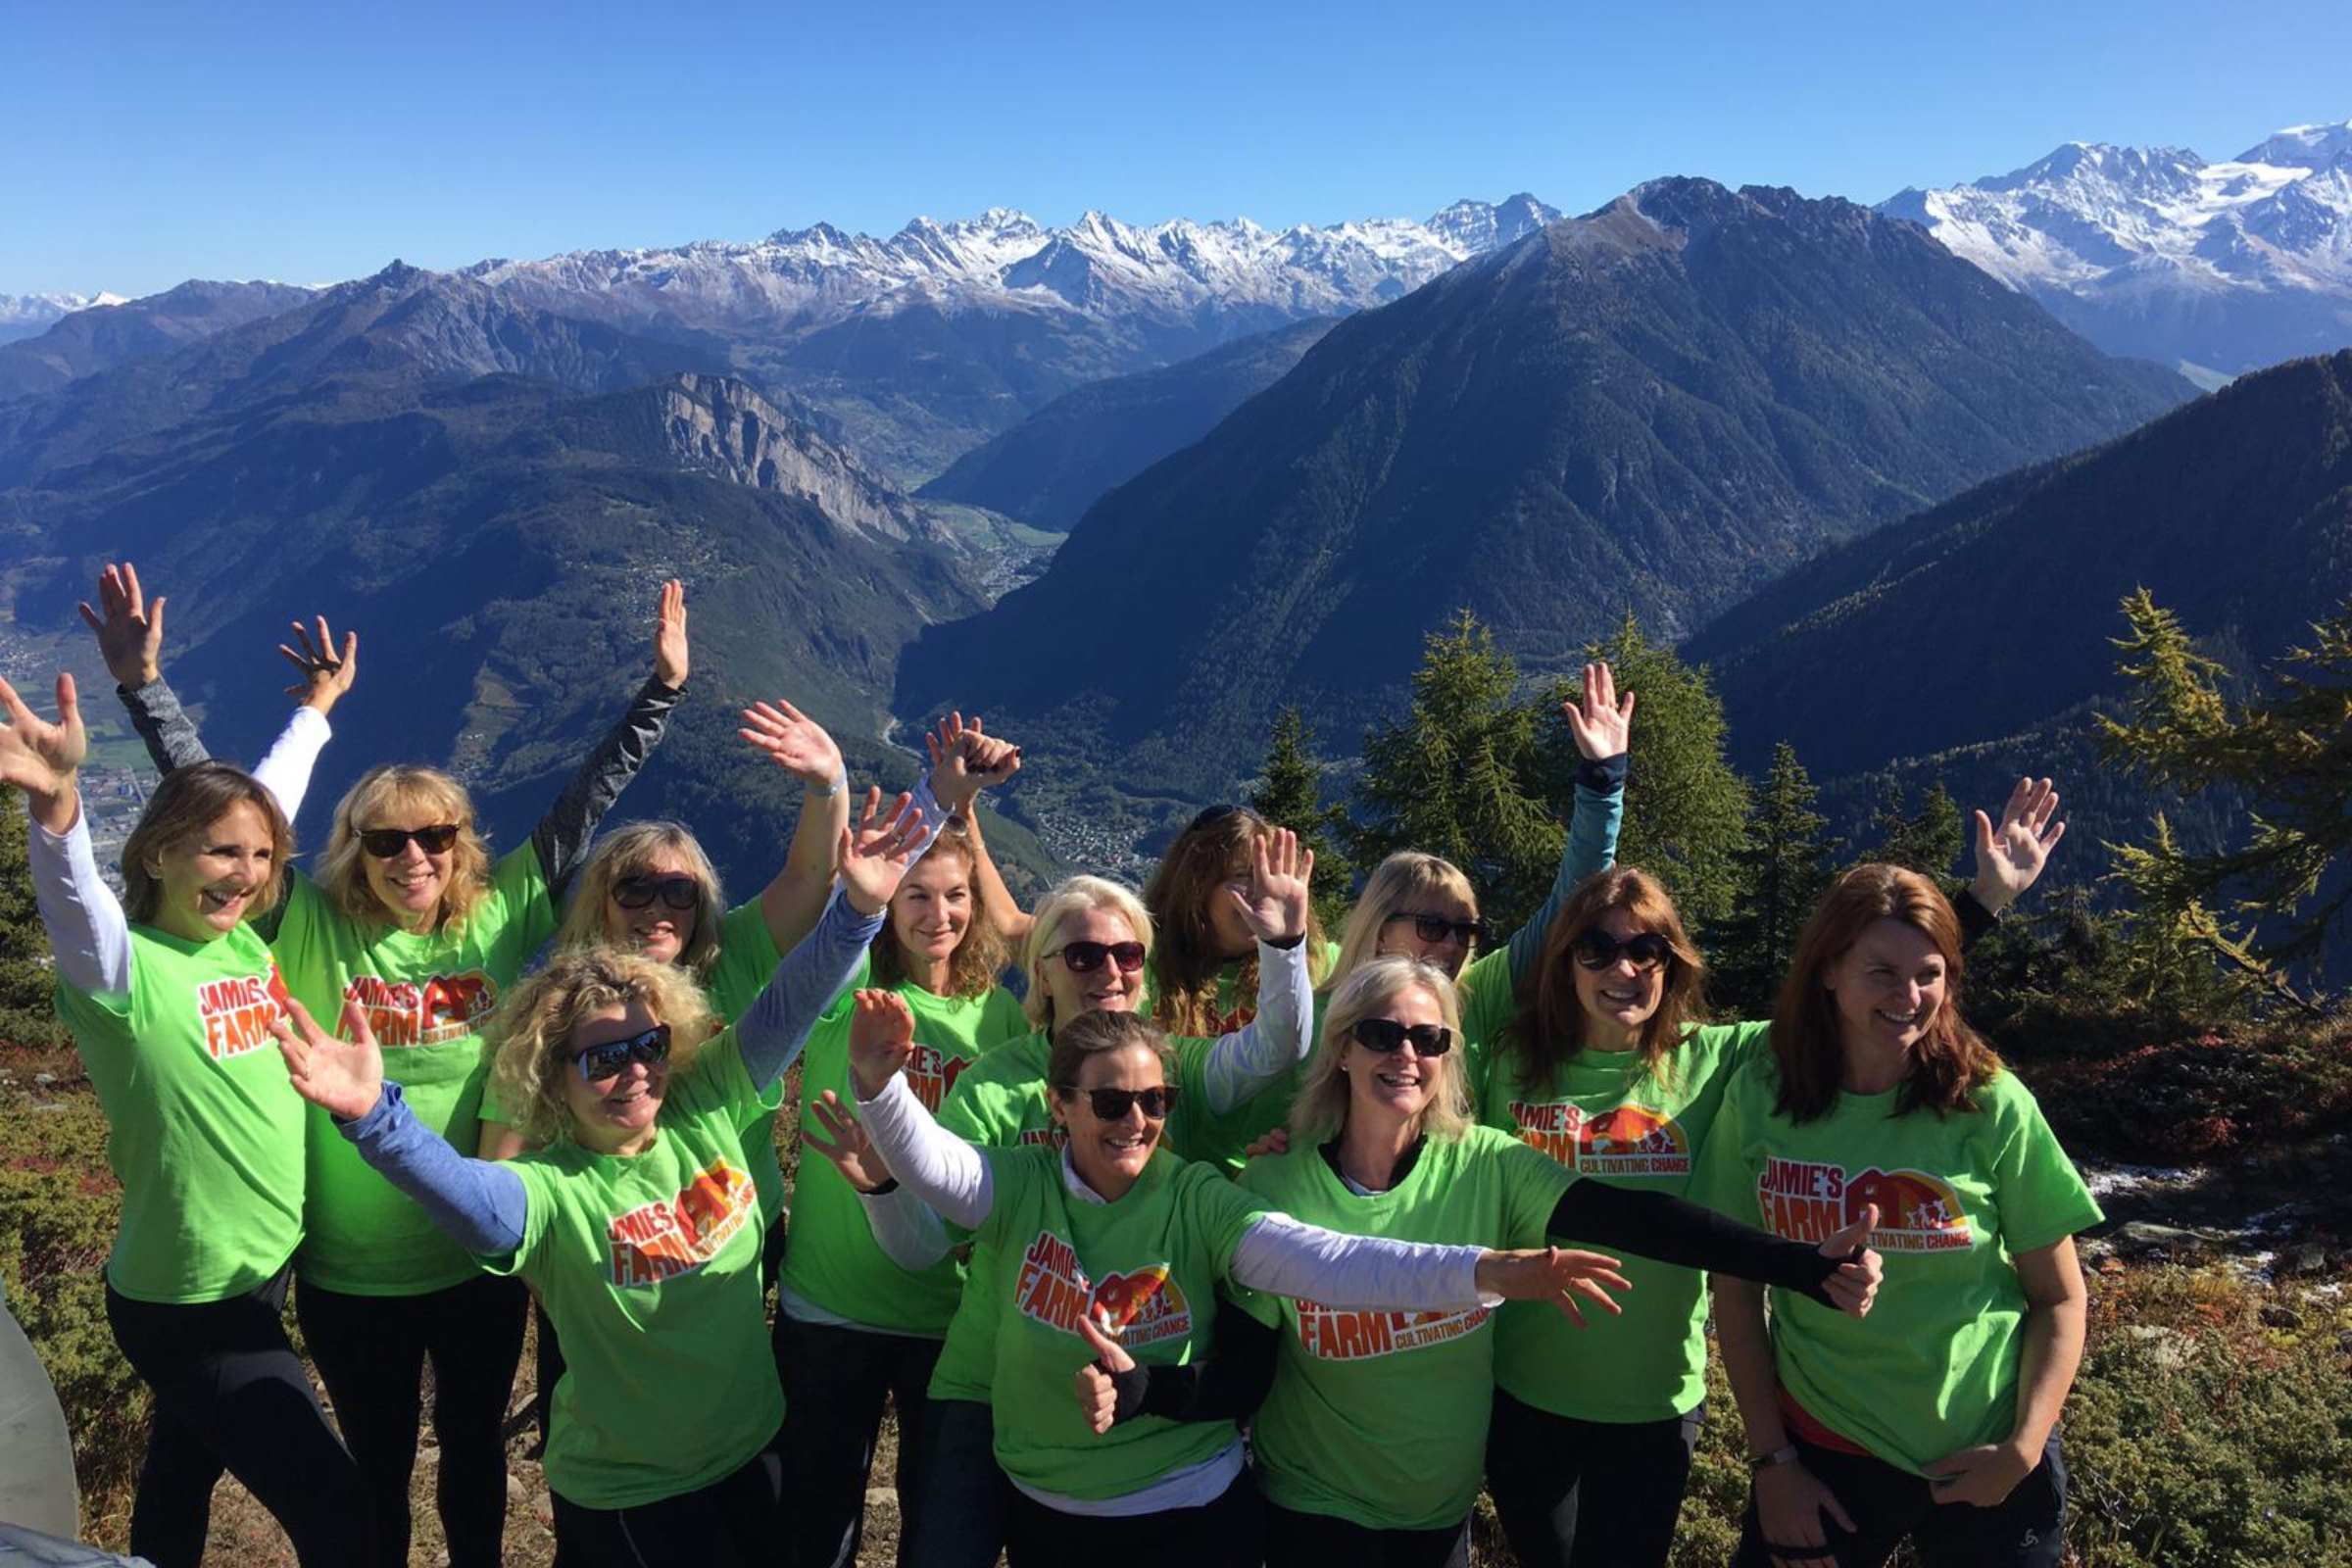 Group of adults in Jamie's Farm tshirts on a mountain in the Alps cheering with their hands up